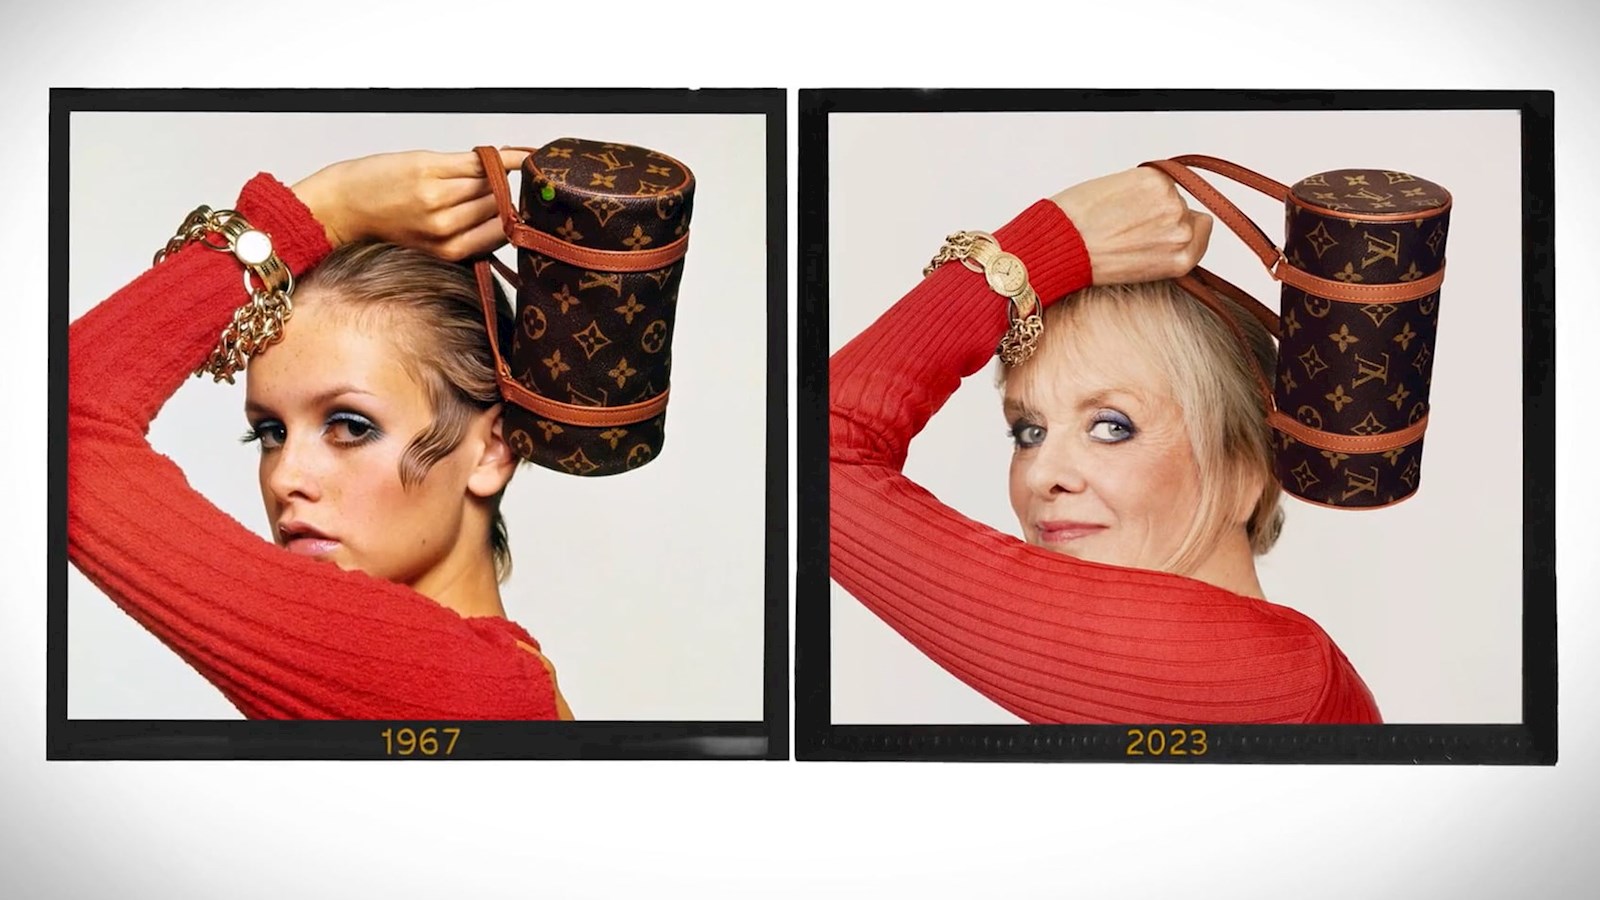 Polaroid of a British model Twiggy in 1967 wearing a red top and holding a Chanel bag over her head next to another polaroid replicating the image with Twiggy in 2023